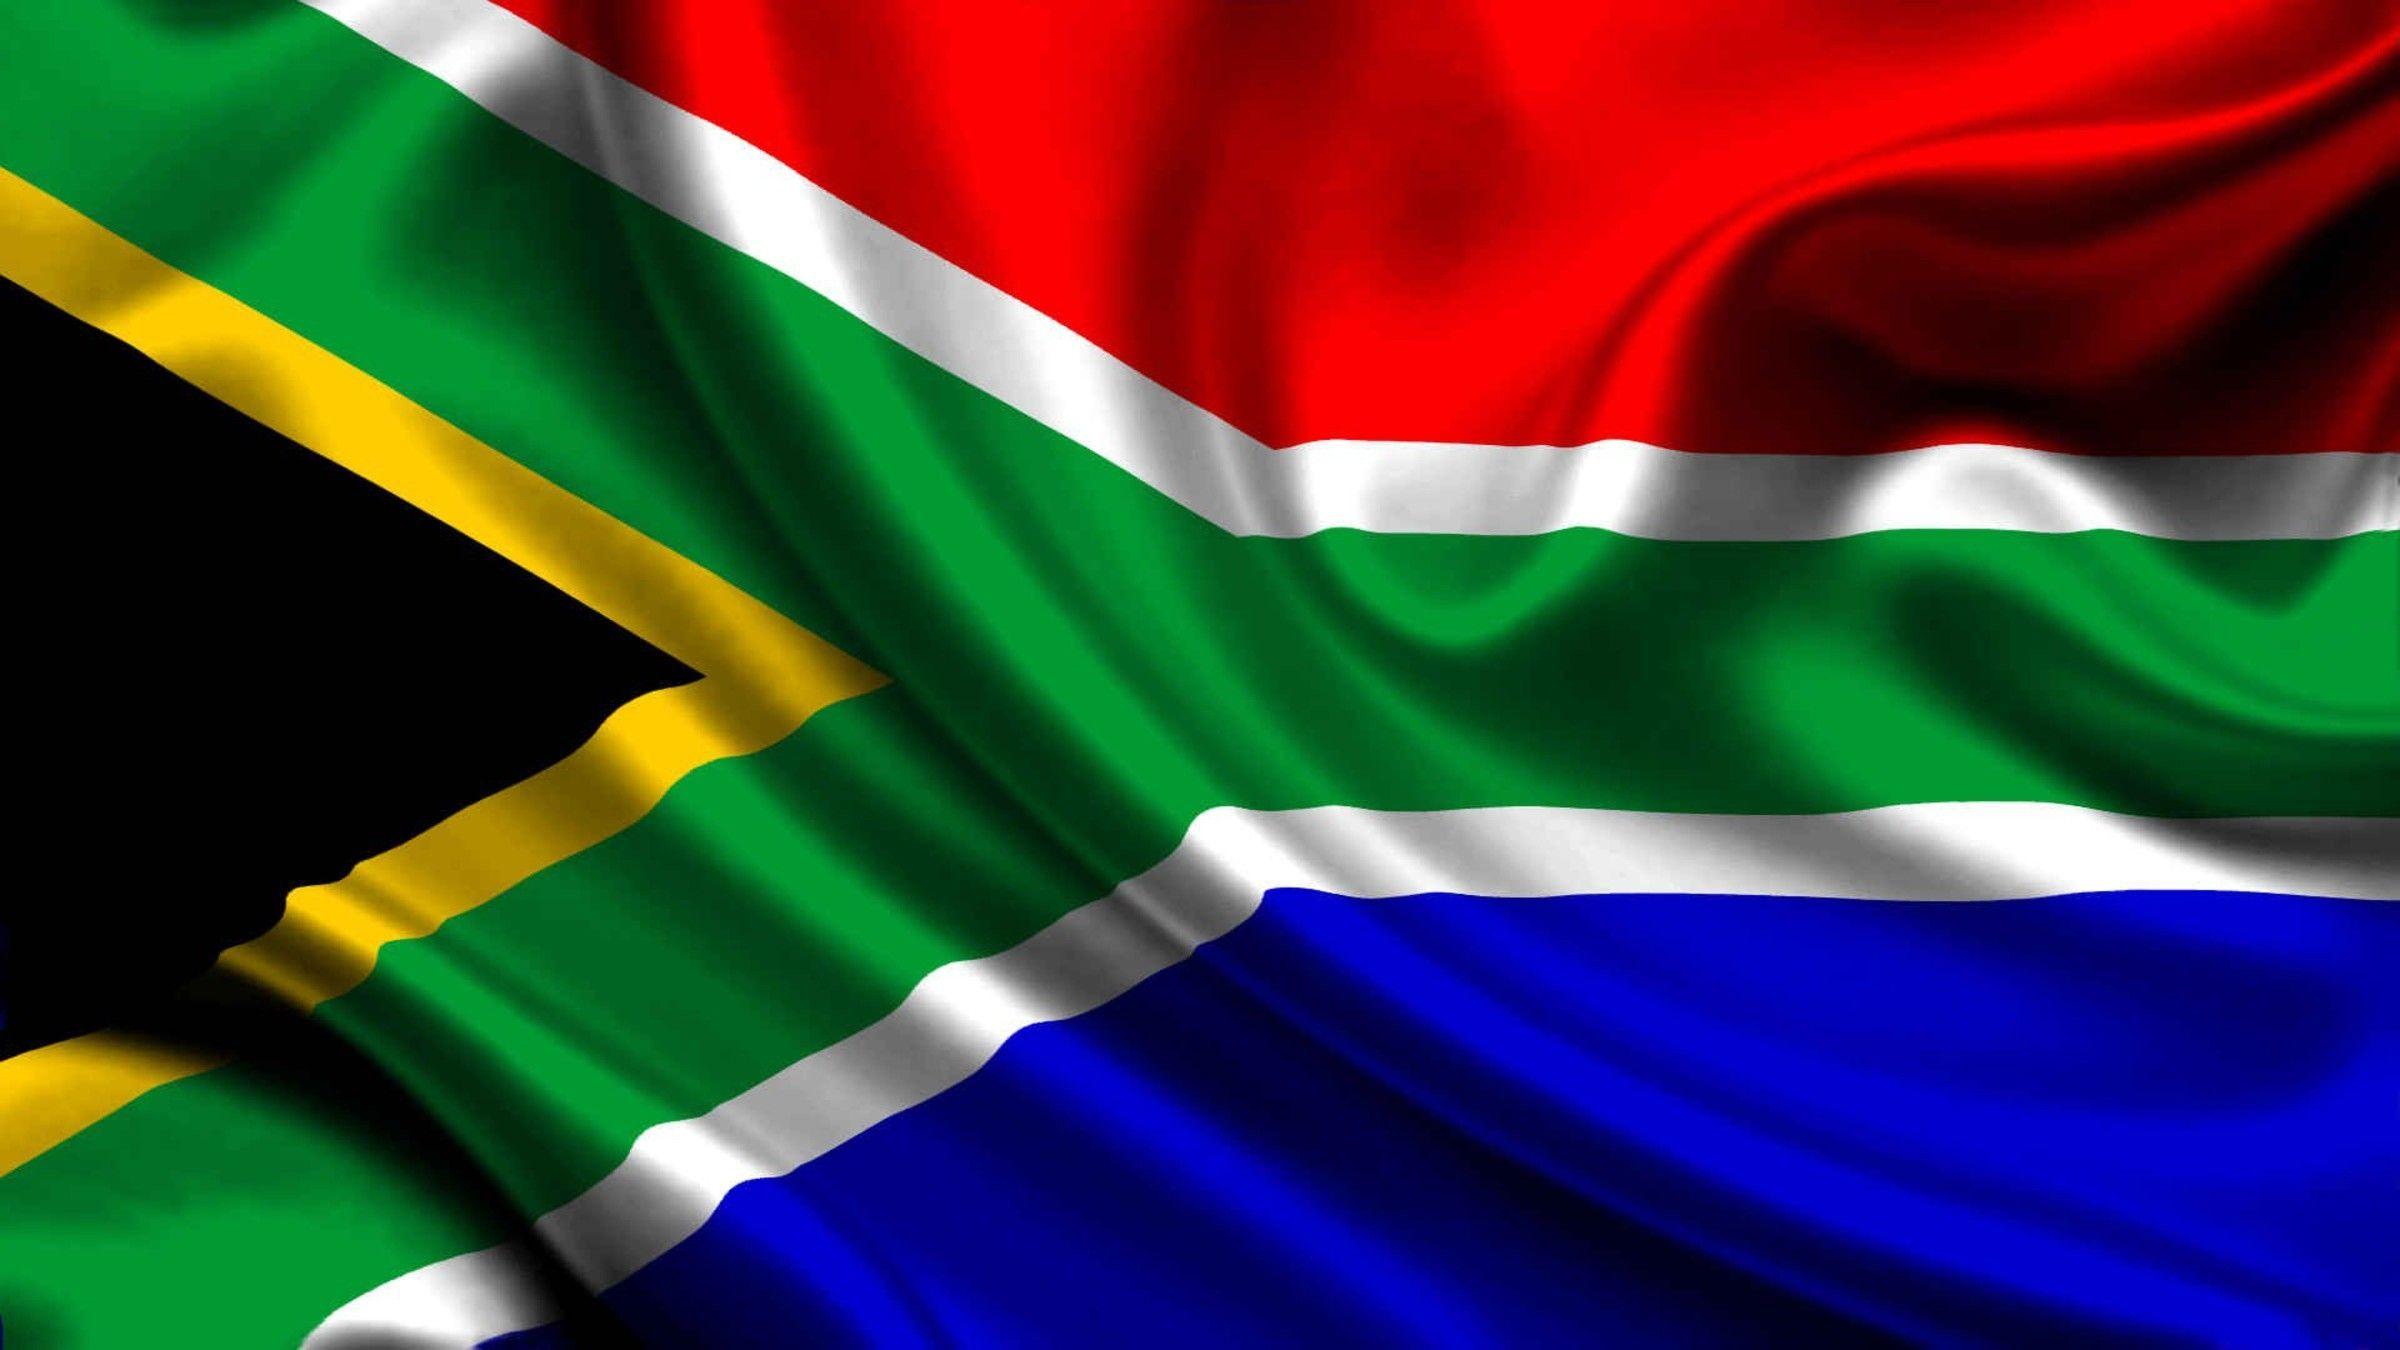 Flags south africa wallpaper. PC